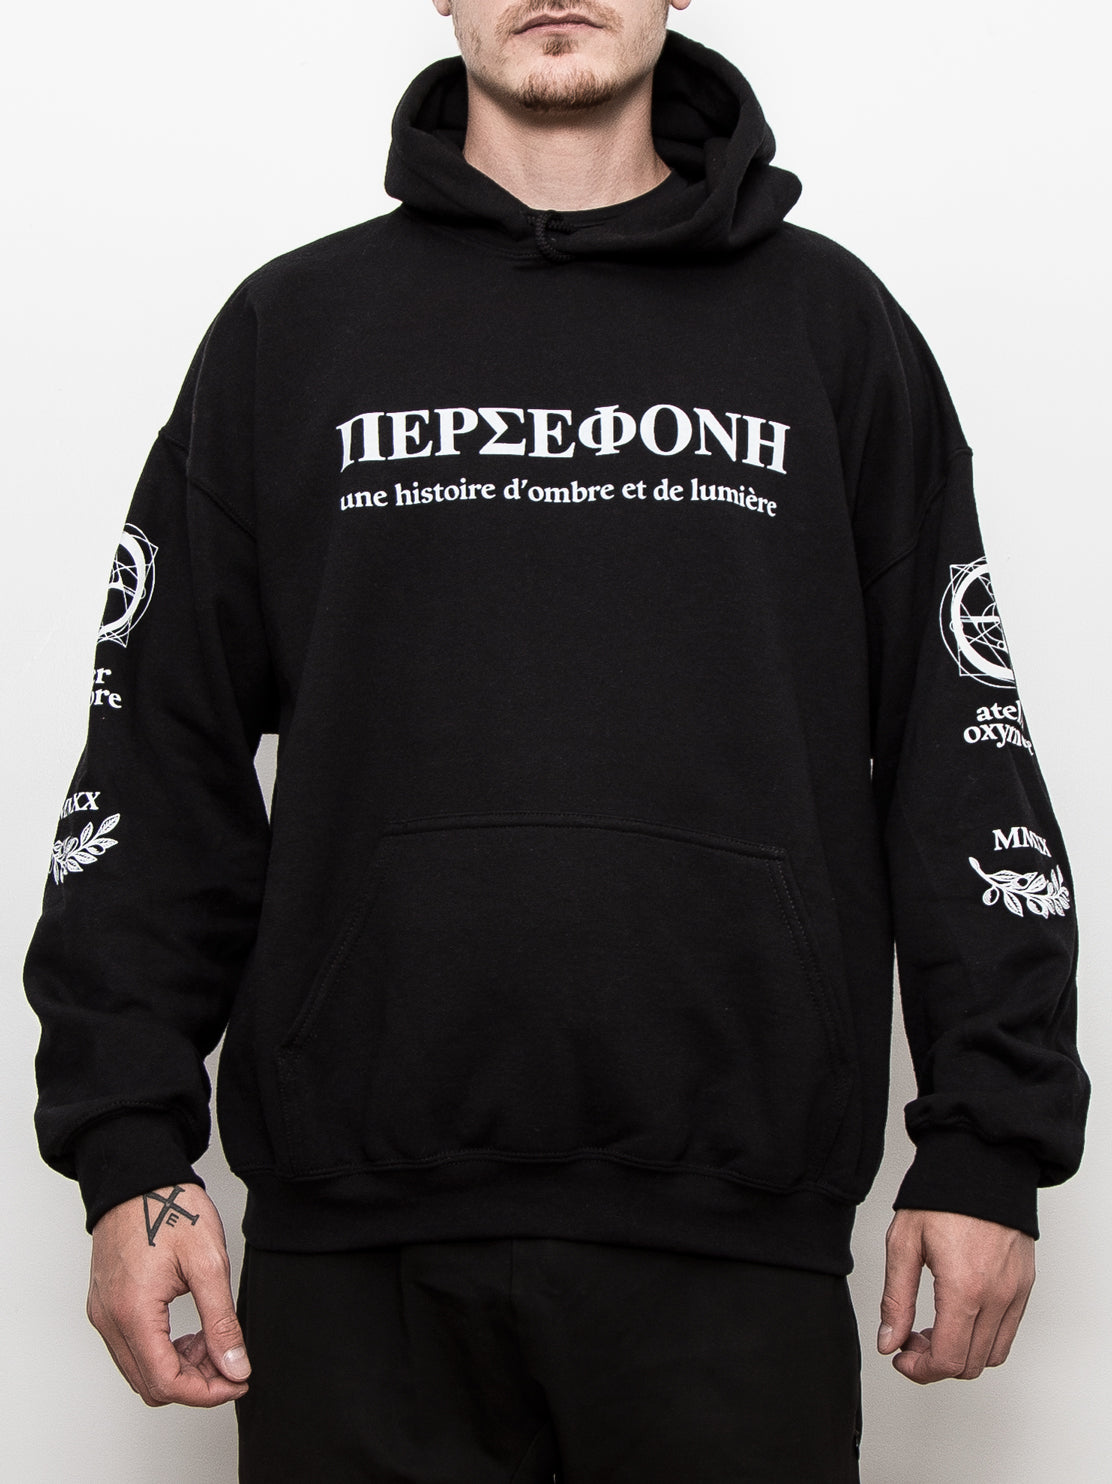 Collection Hoodie